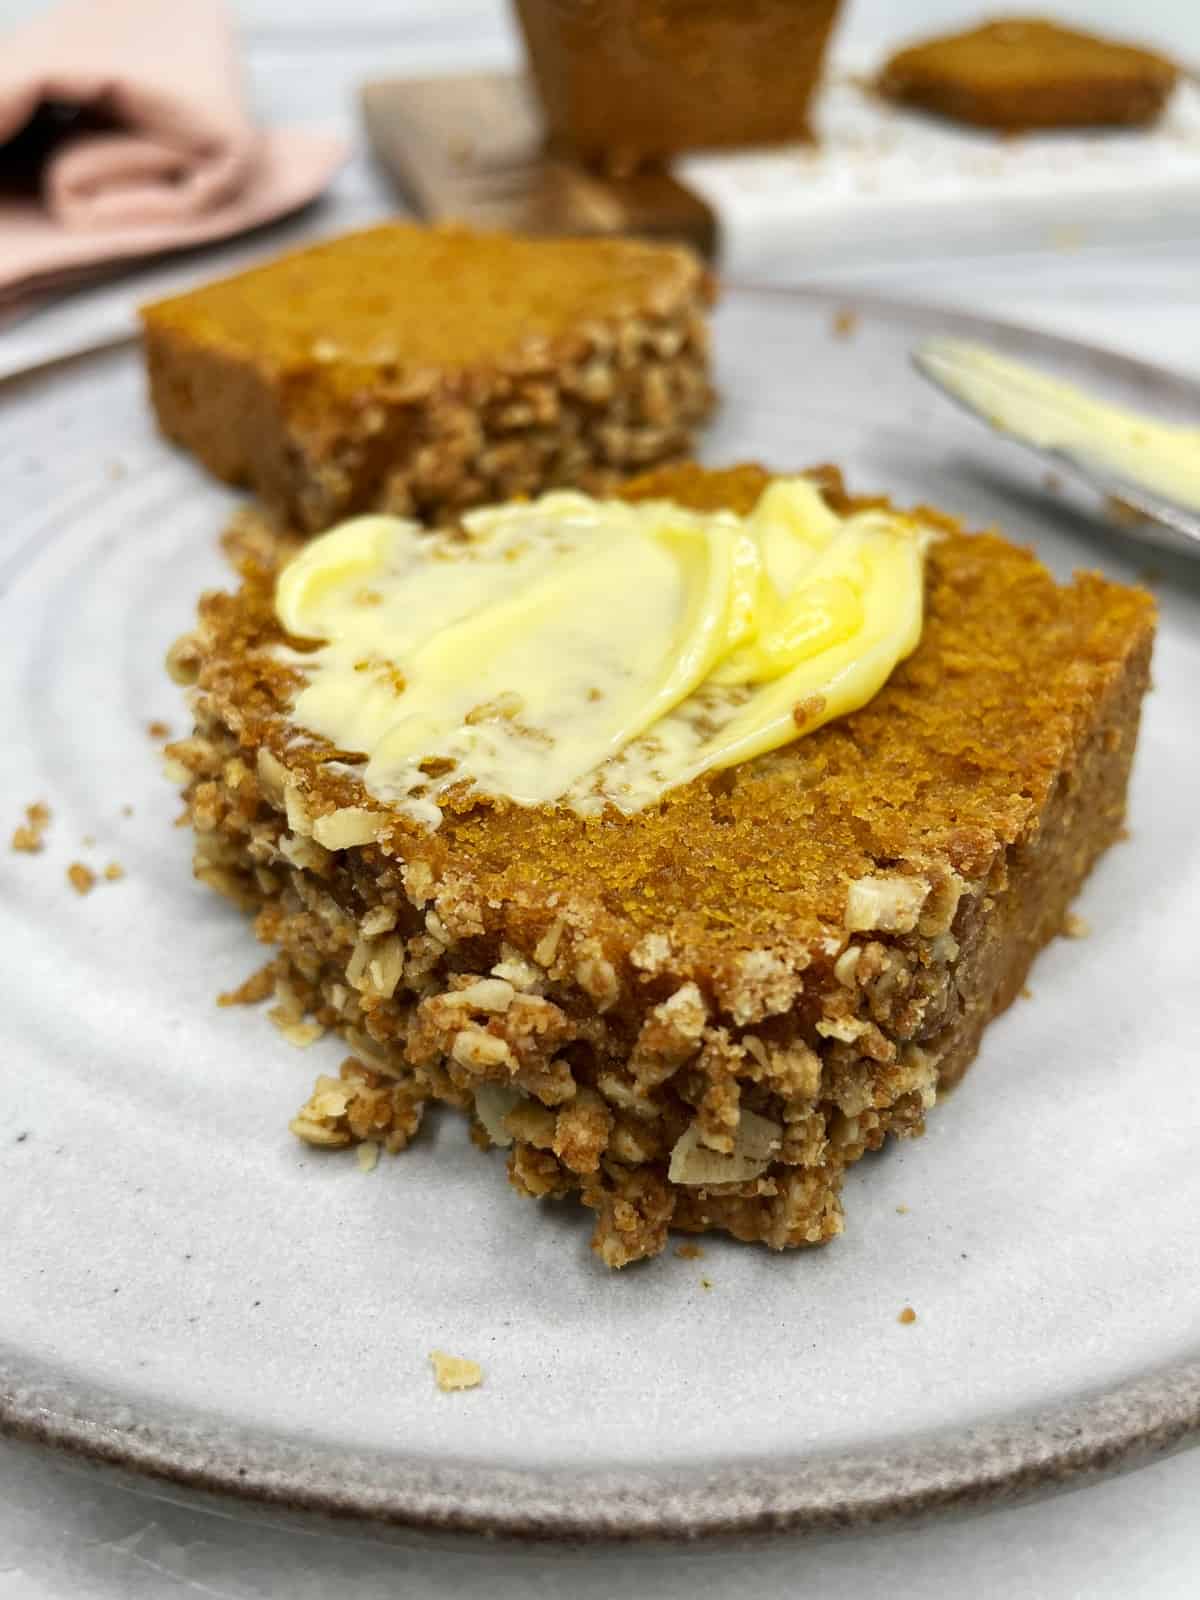 Slices of pumpkin banana bread with butter served on a grey plate